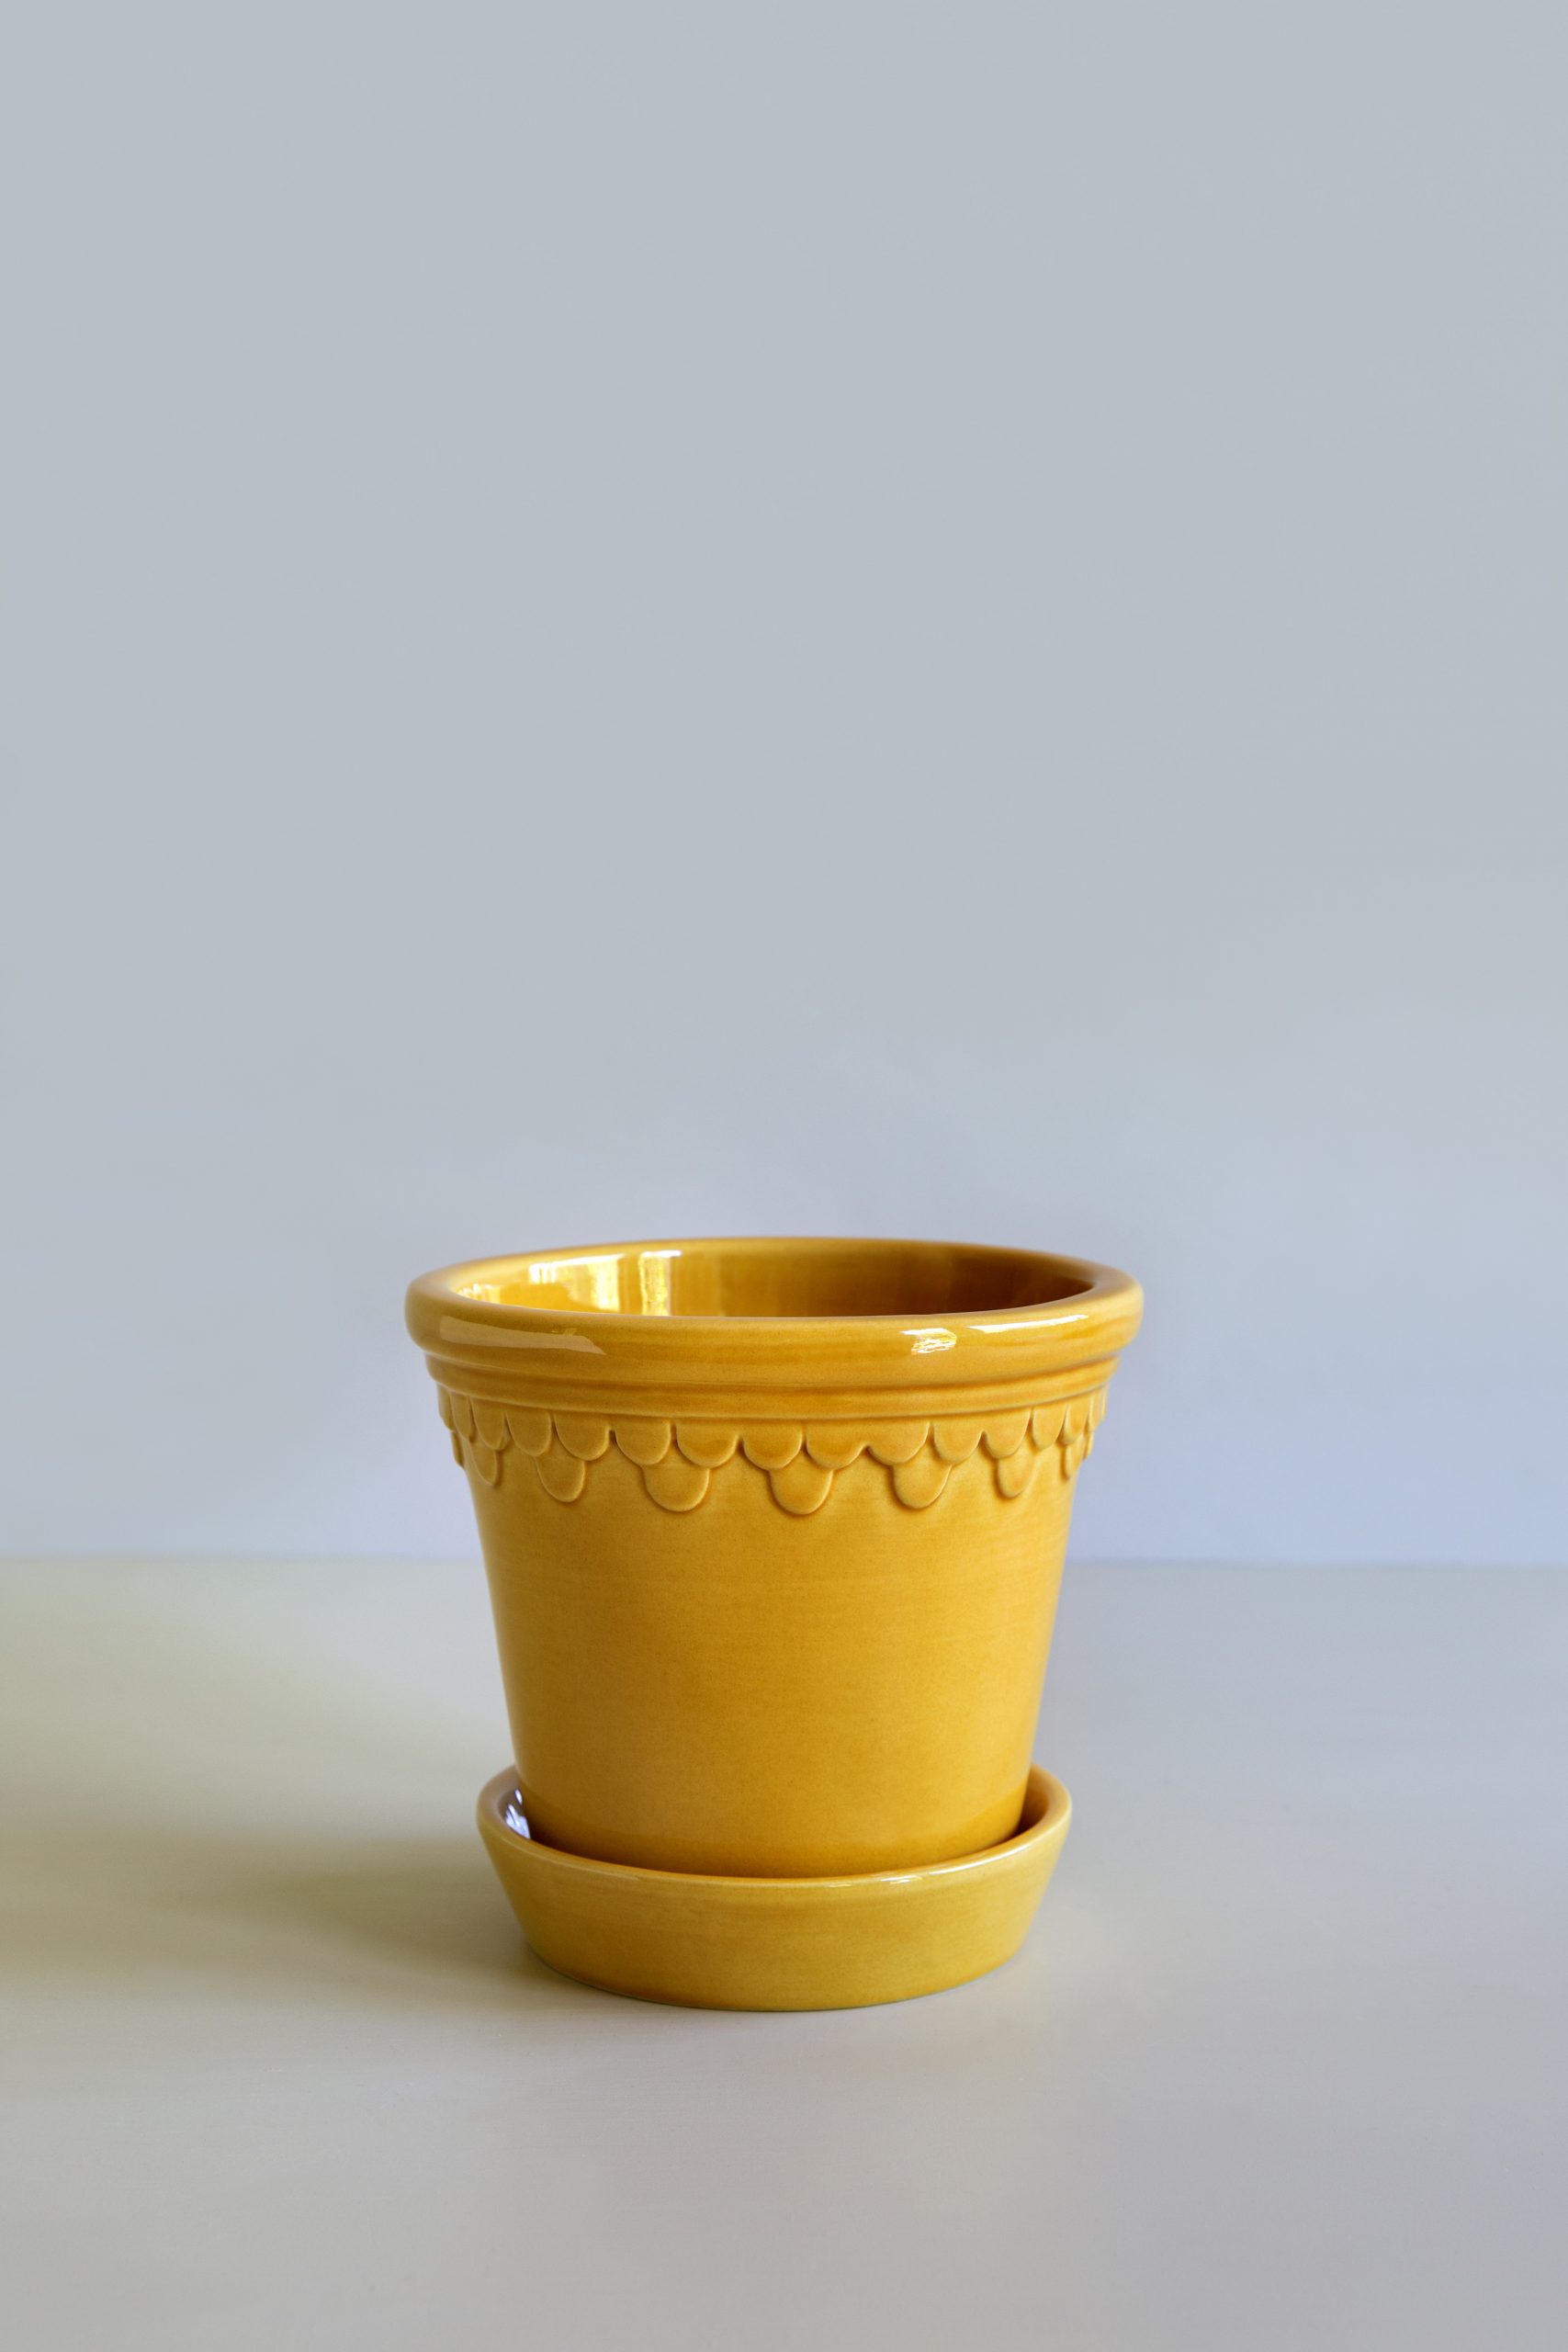 Glazed amber yellow pot with saucer.